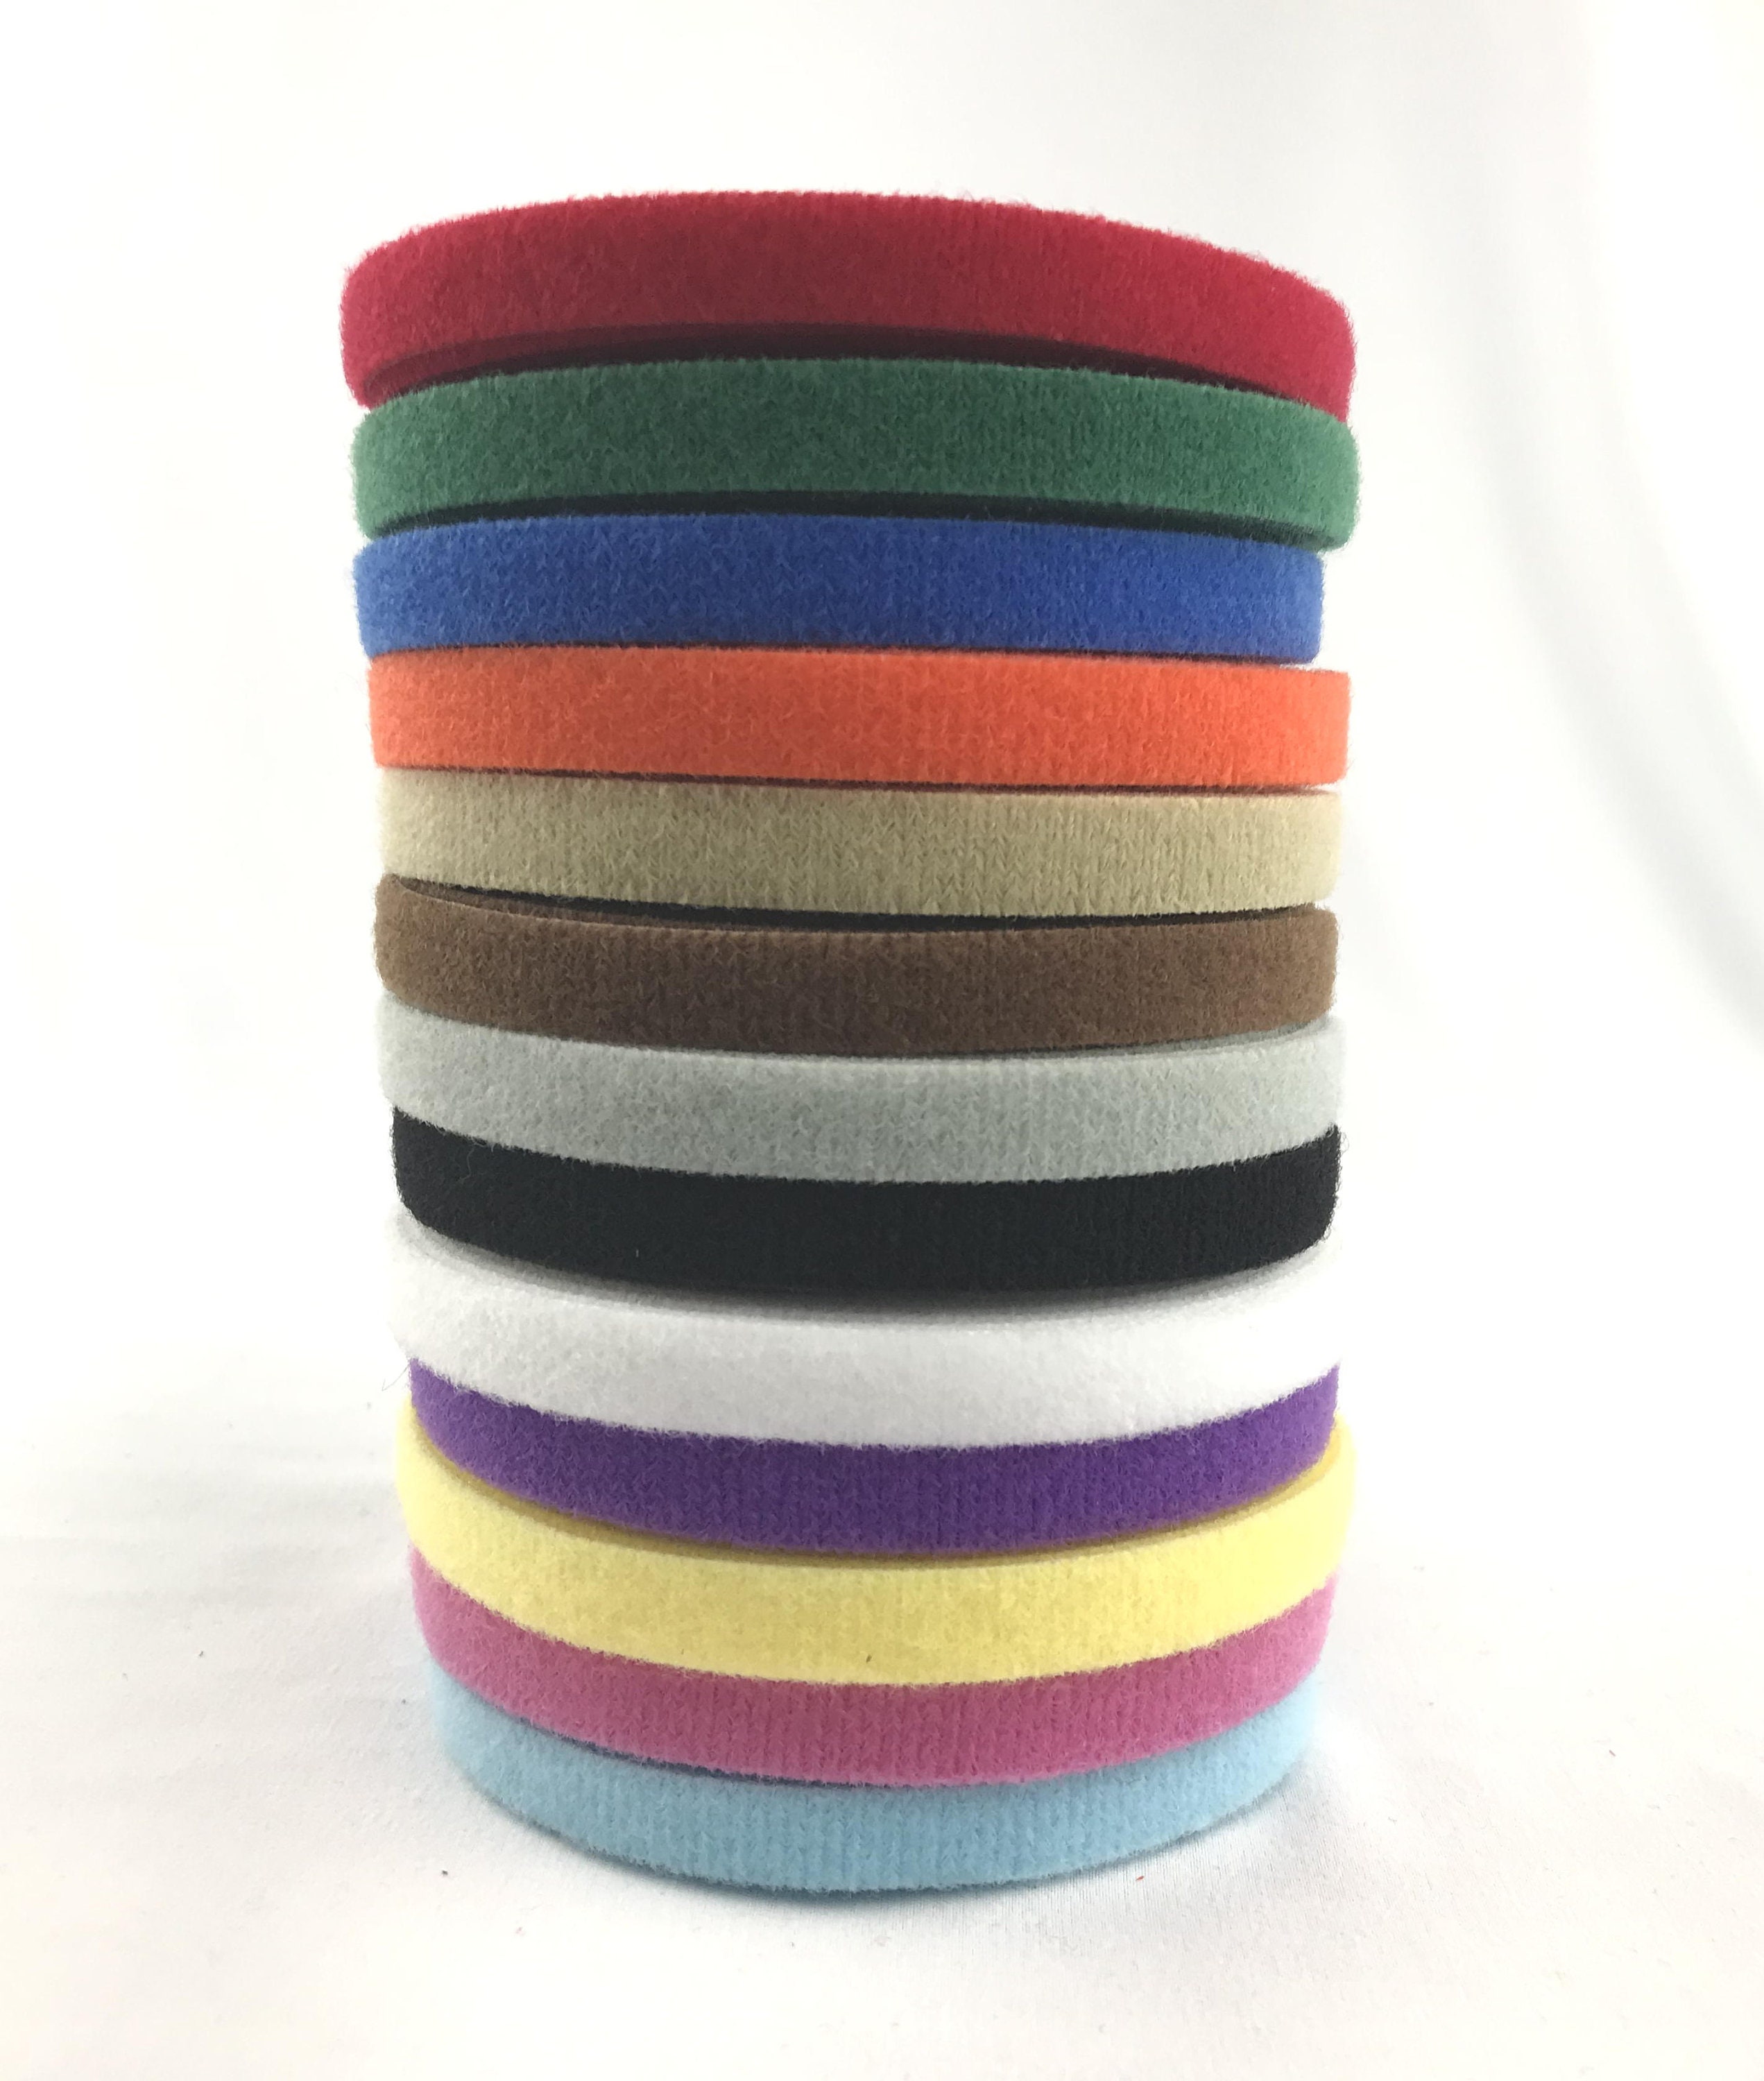 Ultra Thin Soft Type Special Functionality Velcro 2(id:4840022) Product  details - View Ultra Thin Soft Type Special Functionality Velcro 2 from  Shenzhen Hongxin VELCRO Co.,Ltd - EC21 Mobile